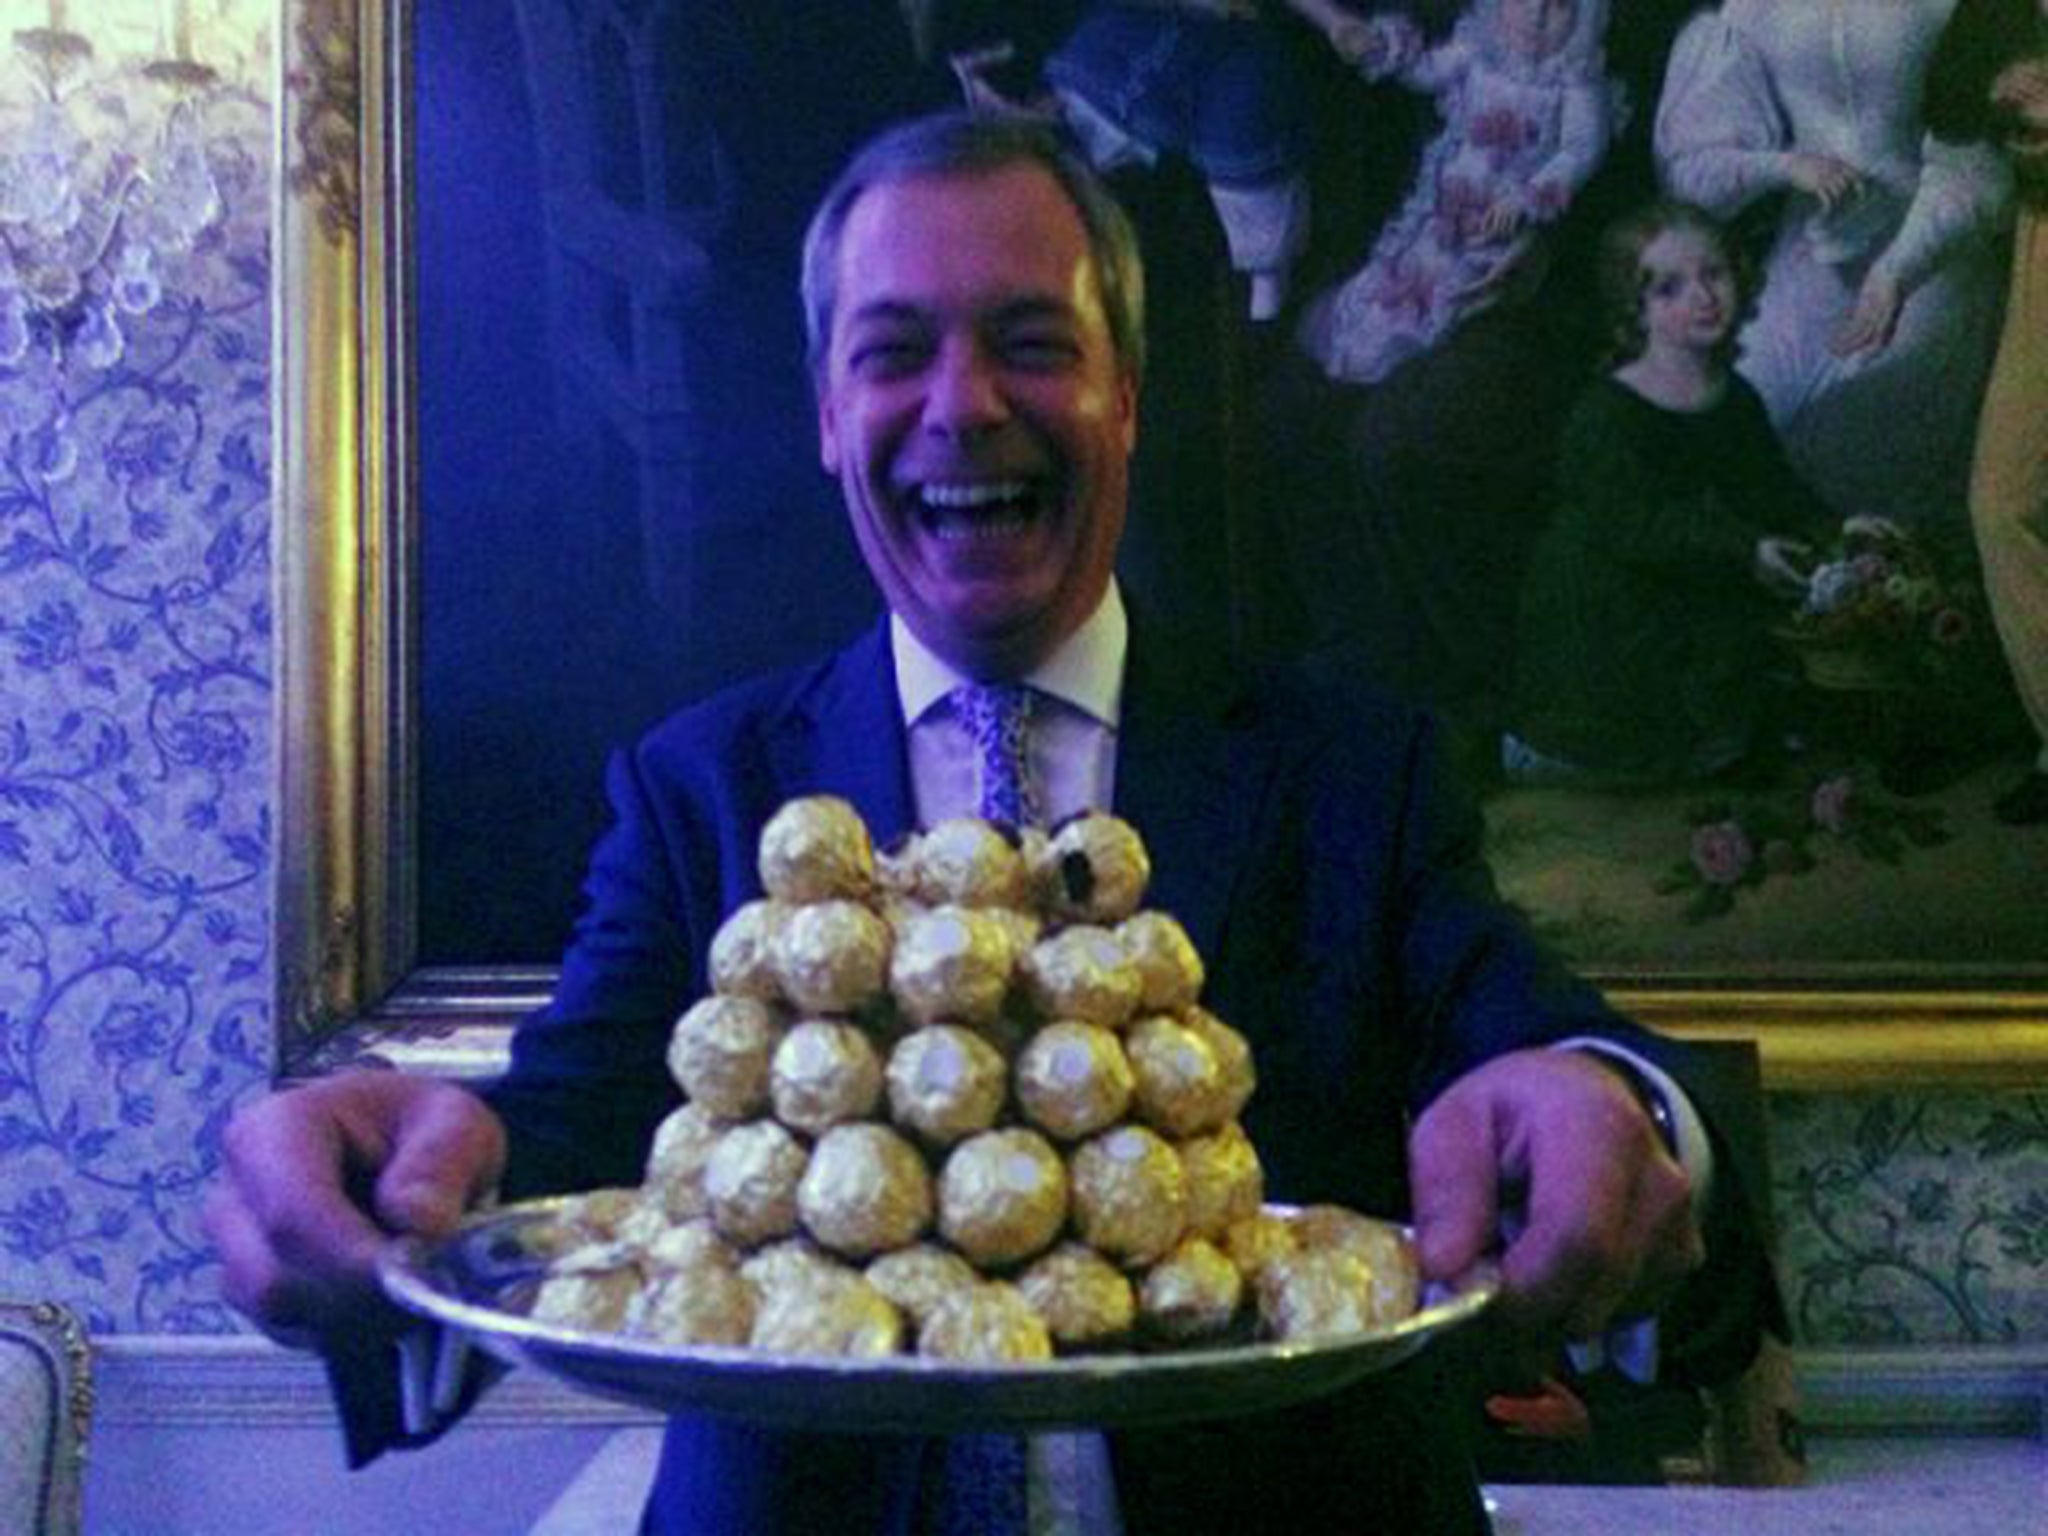 Nigel Farage holds a platter of Ferrro Rocher chocolates during a party in London